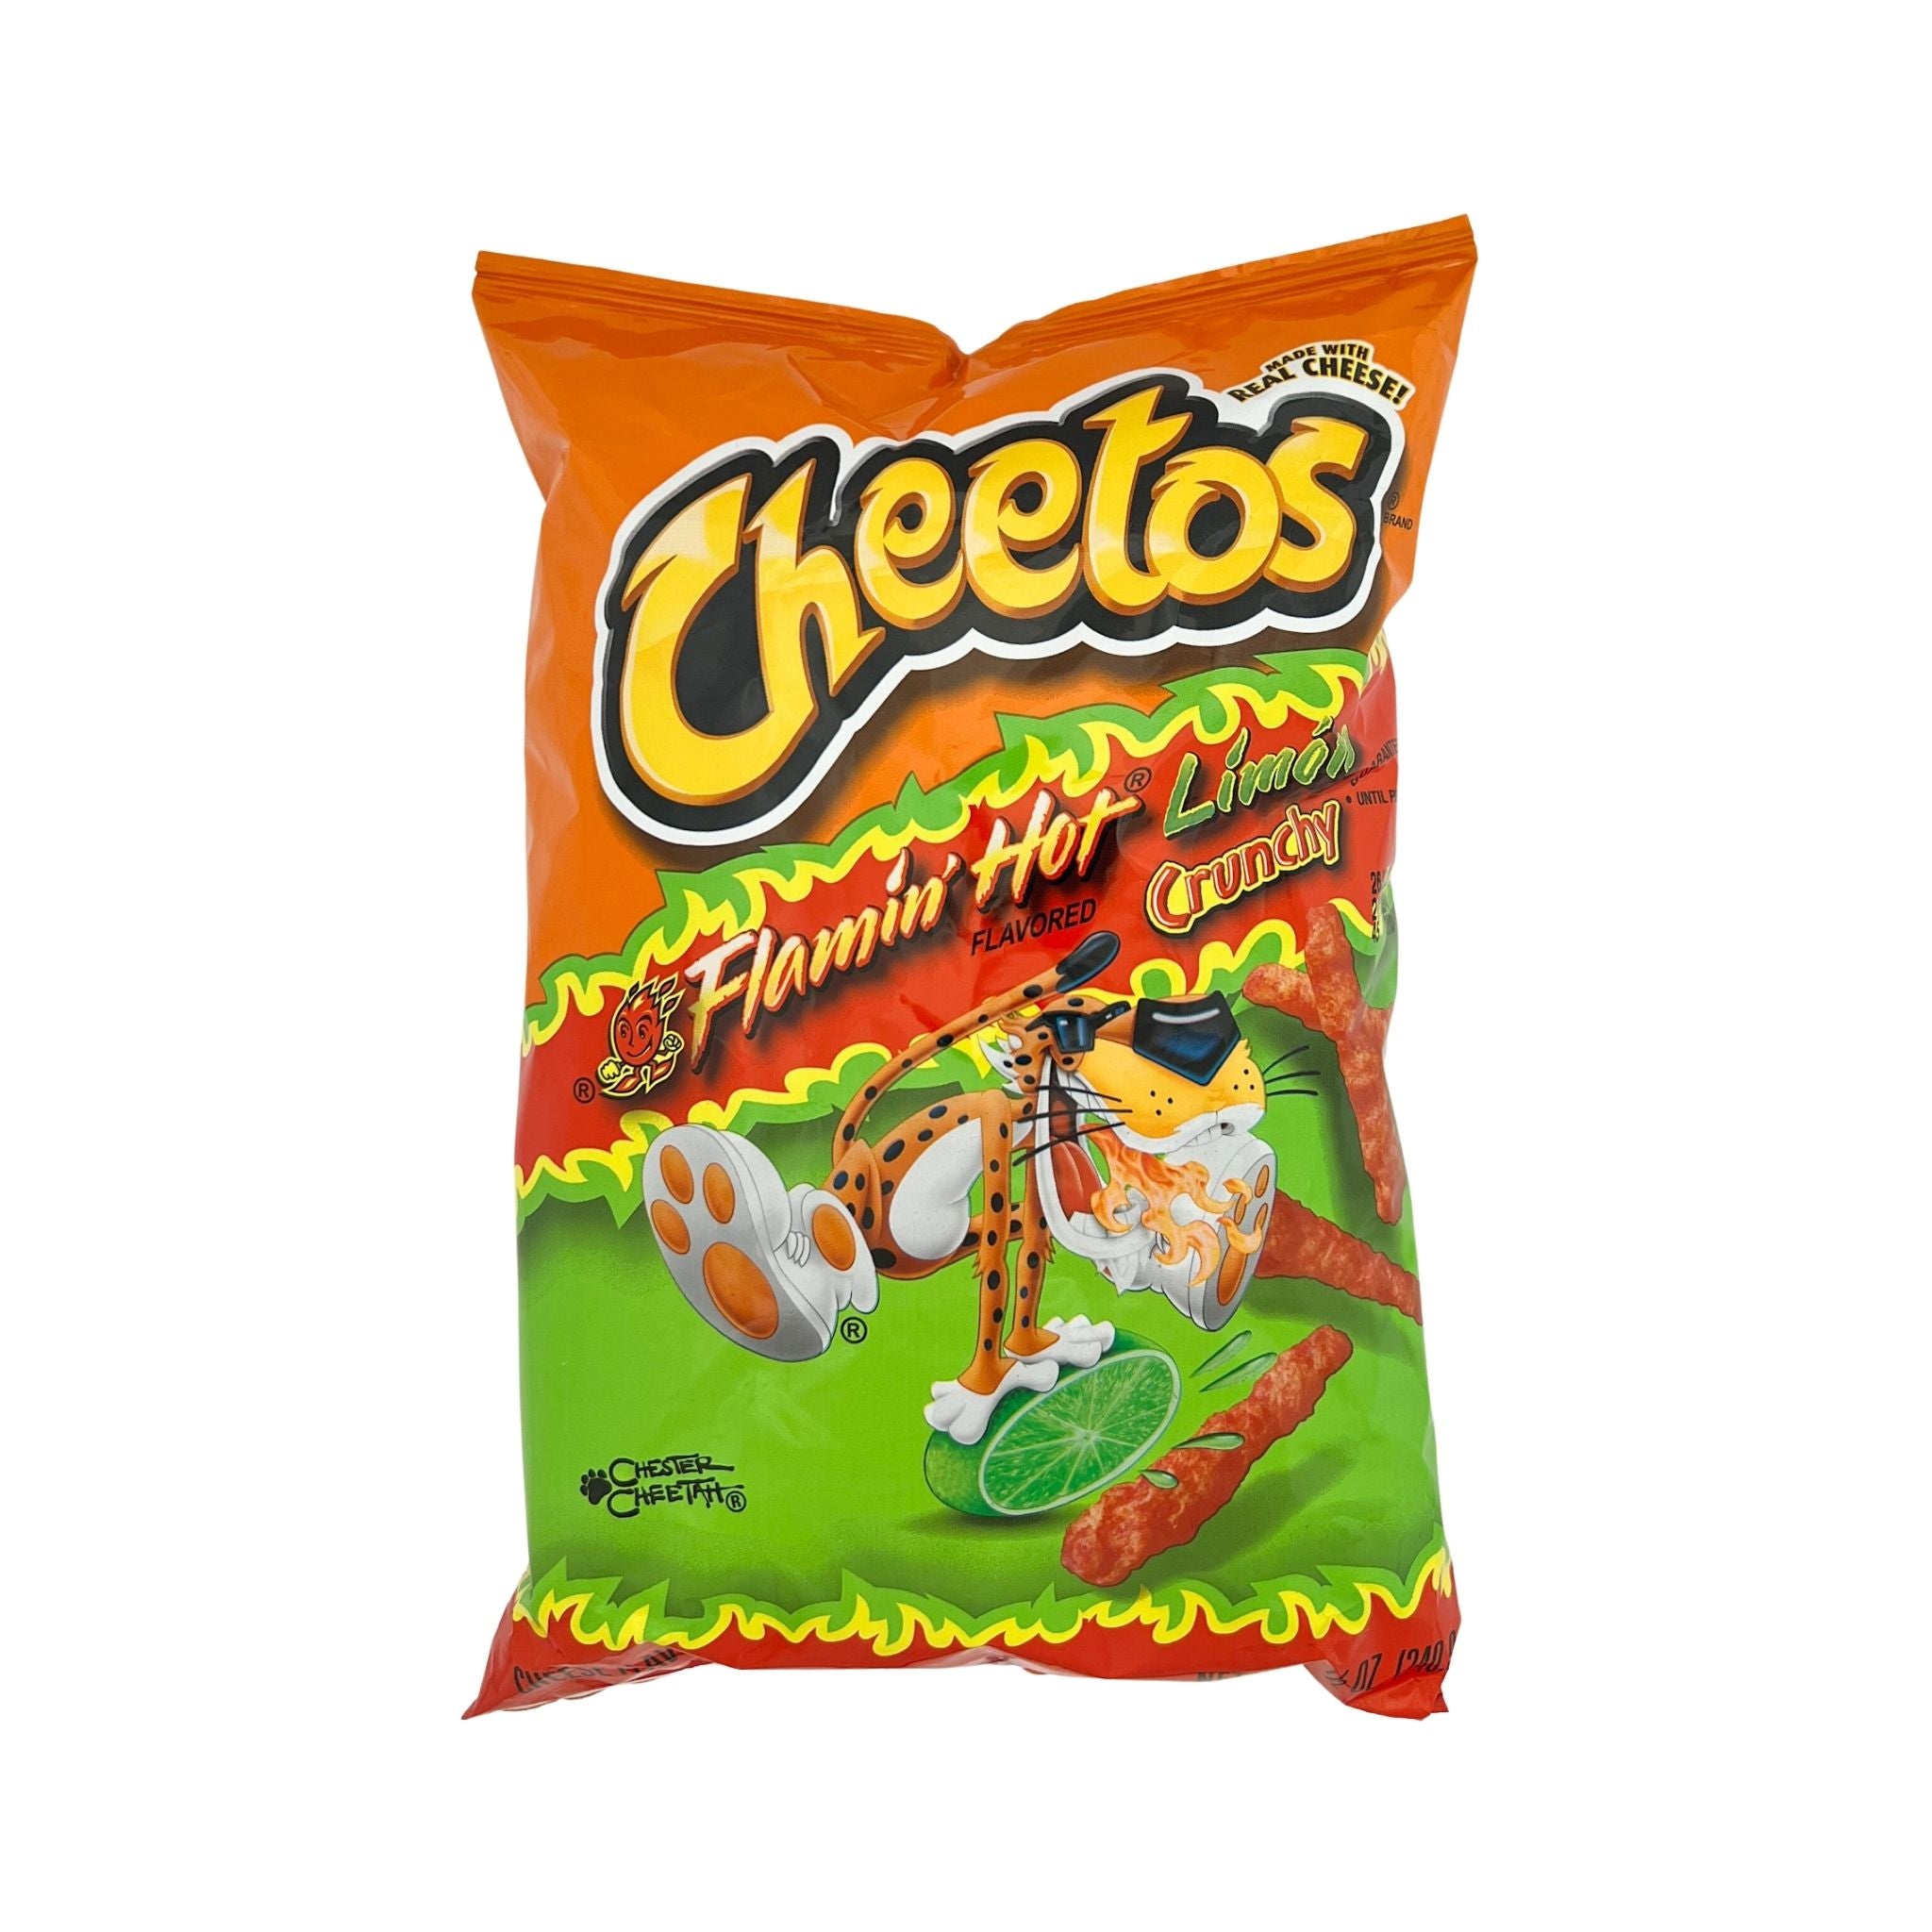  Cheetos Flamin Hot Limon, 2 ounce bags (Pack of 8) : Grocery &  Gourmet Food